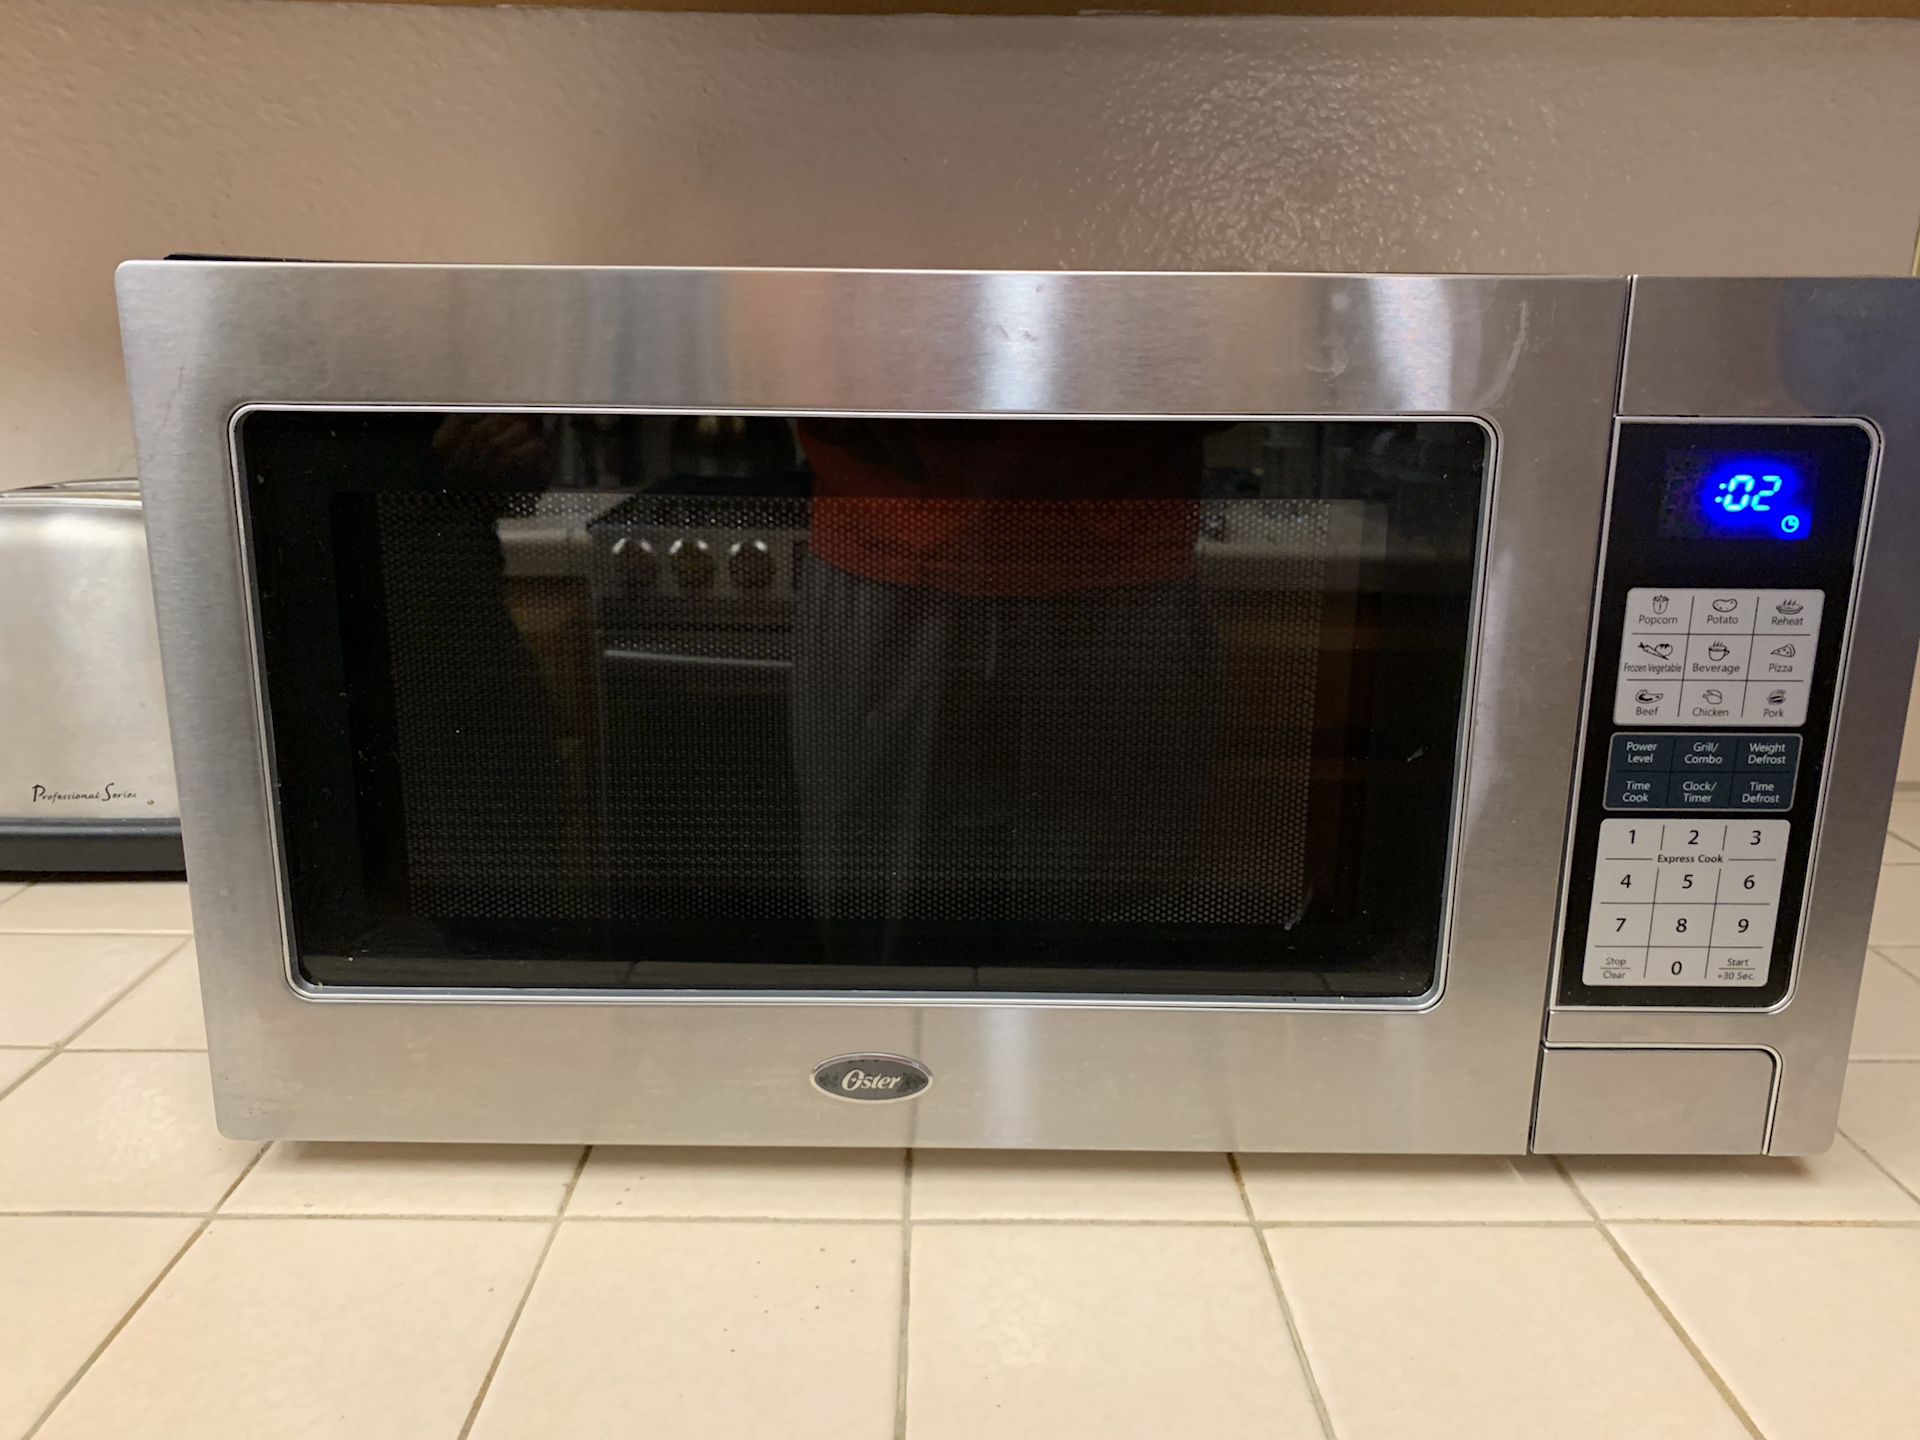 Just like new Microwave